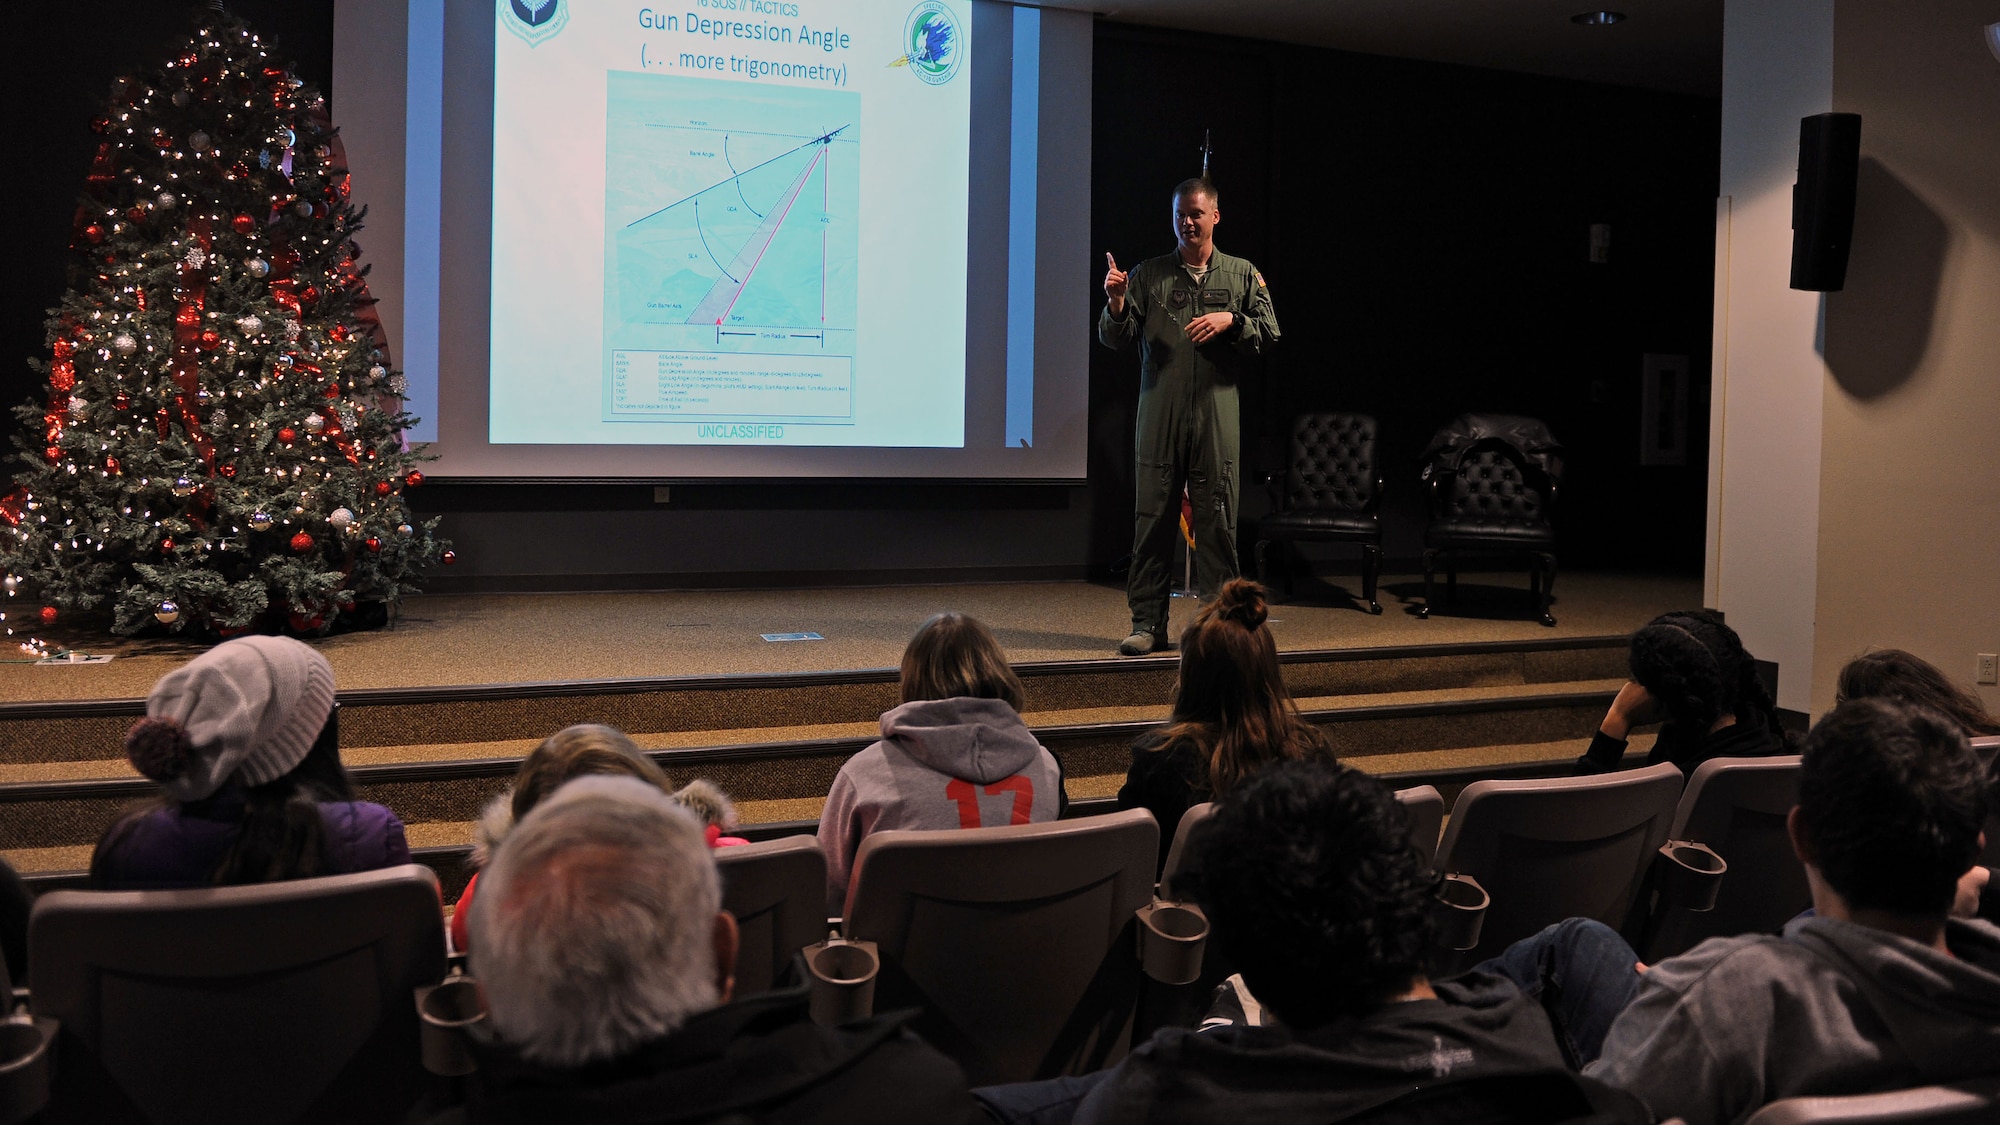 Capt. Daniel Sickles, 16th Special Operations Squadron Combat Systems officer, speaks to Portales High School Math Engineering and Science Achievement club members, Dec. 9, 2016, during a tour at Cannon Air Force Base, N.M. The tour, which consisted of an AC-130 technology brief and an in-depth look at a powered-on AC-130W, was designed to give students a practical look at real world math, engineering and science applications. (U.S. Air Force photo by Staff Sgt. Whitney Amstutz/Released)